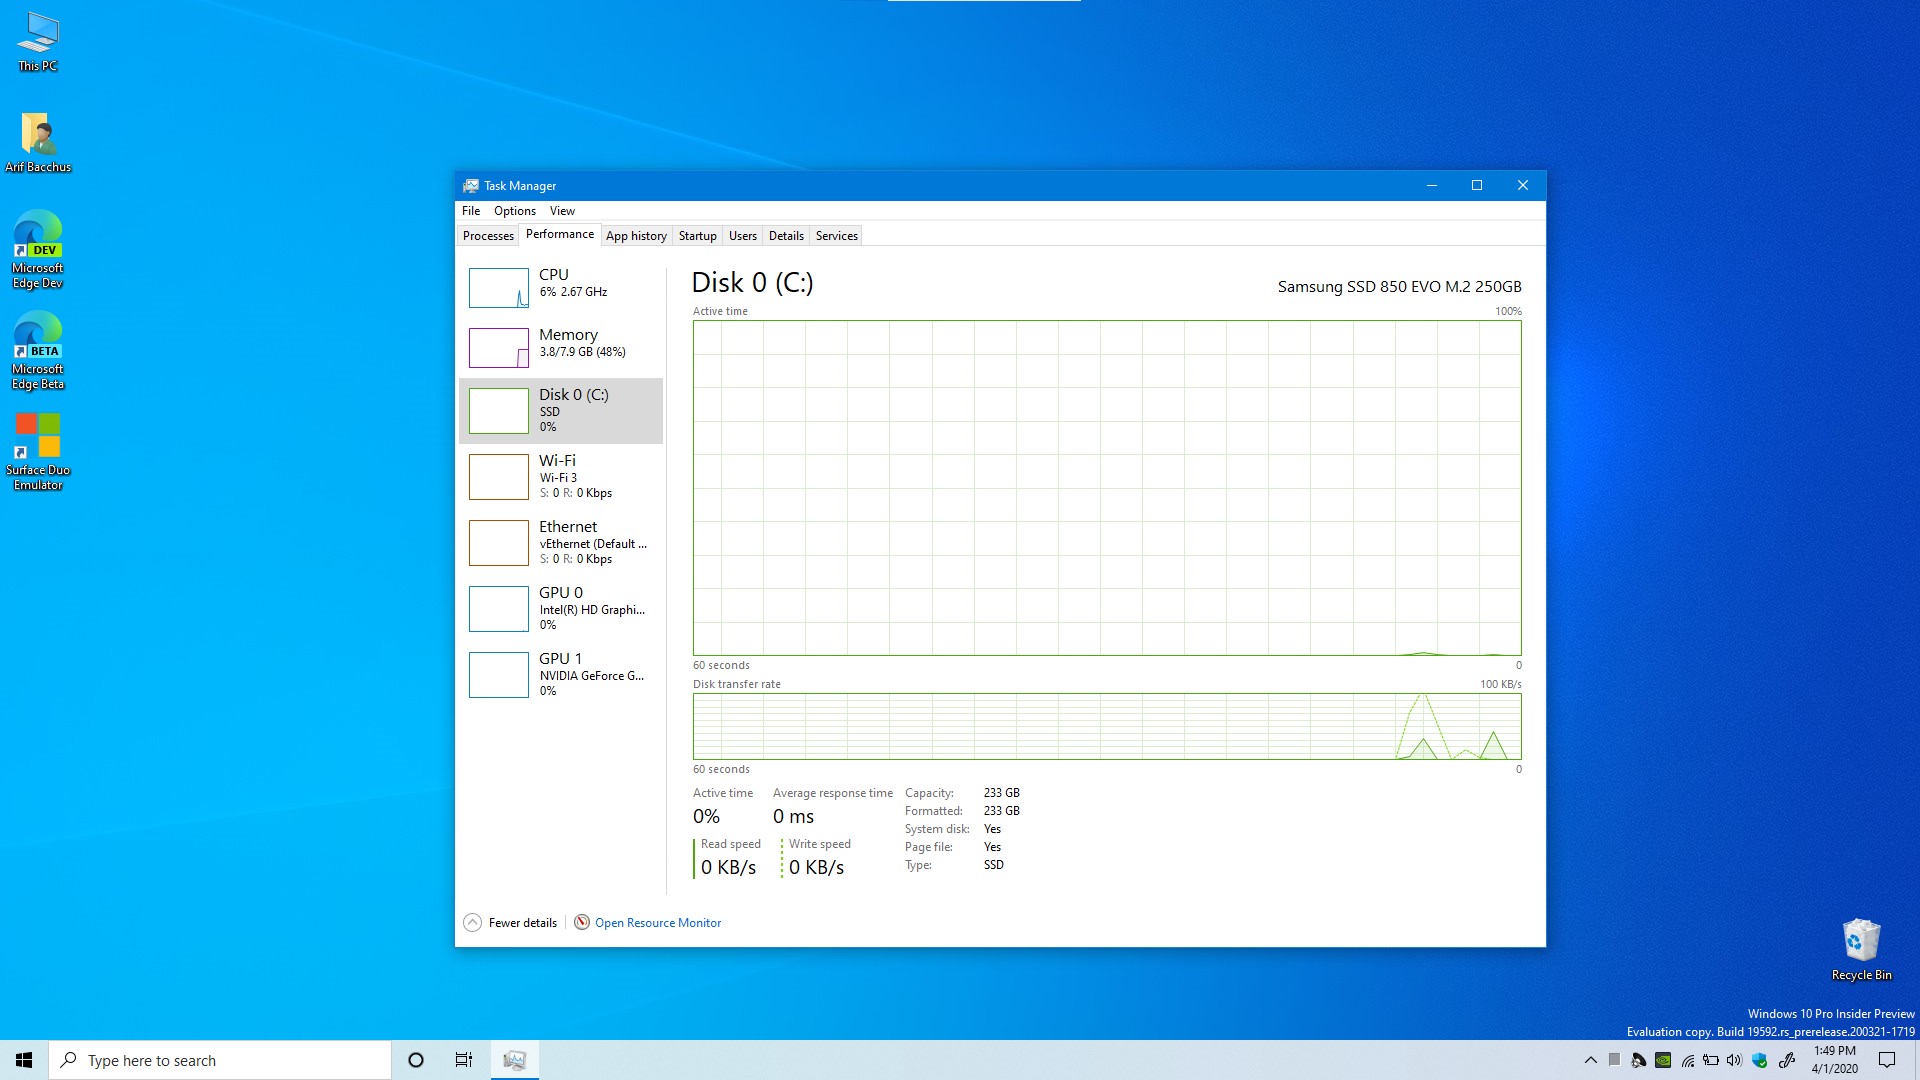 windows 10 may 2020 update review 20h1 ssd type